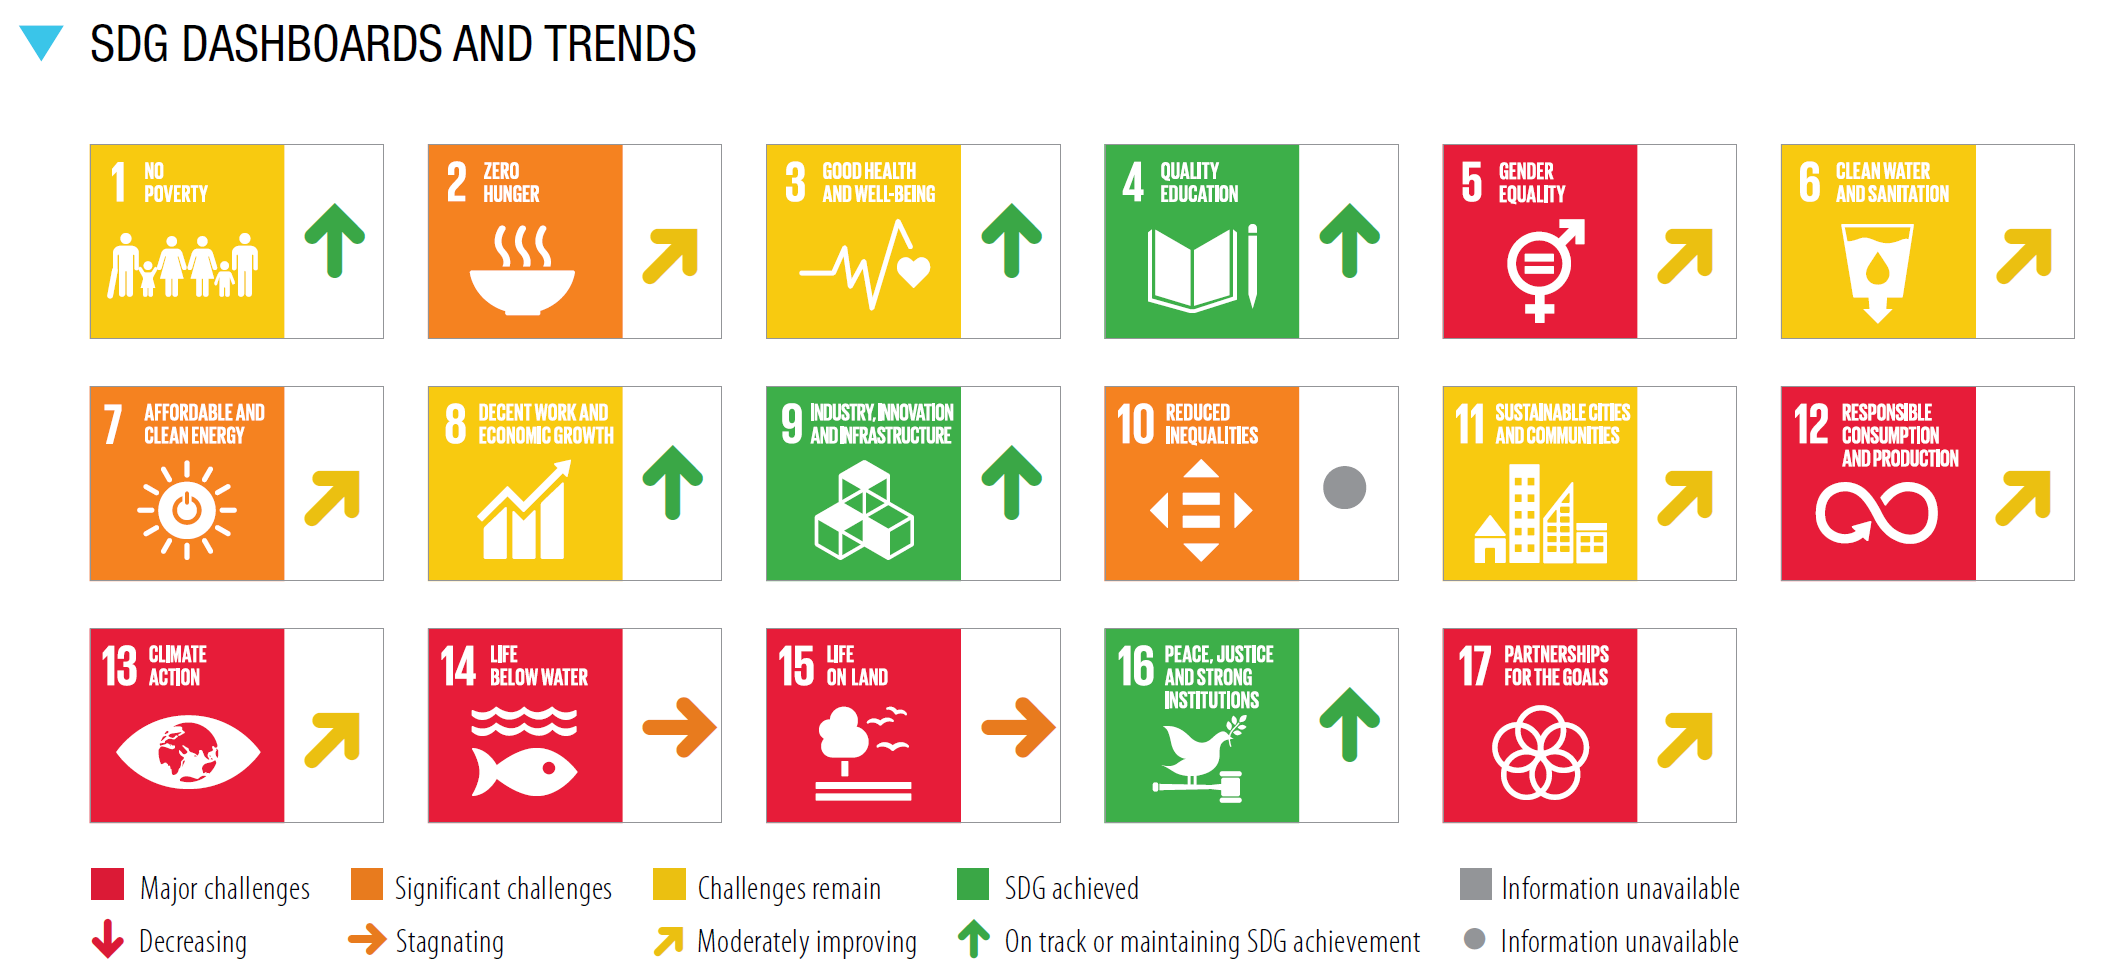 SDG DASHBOARDS AND TRENDS